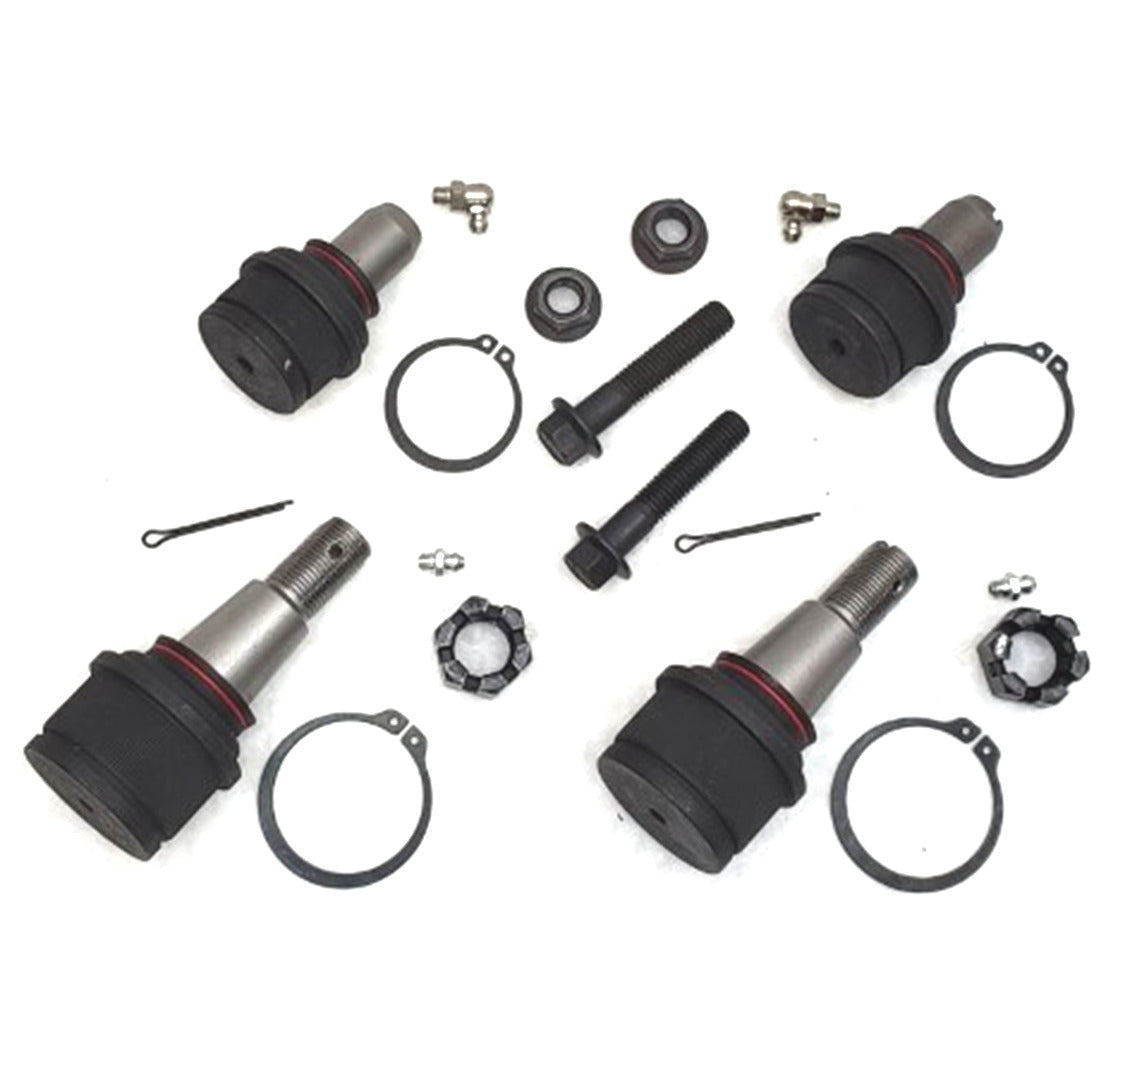 HD Ball Joints Upper and Lower Suspension Kit for 2007-2014 Ford E150 2WD